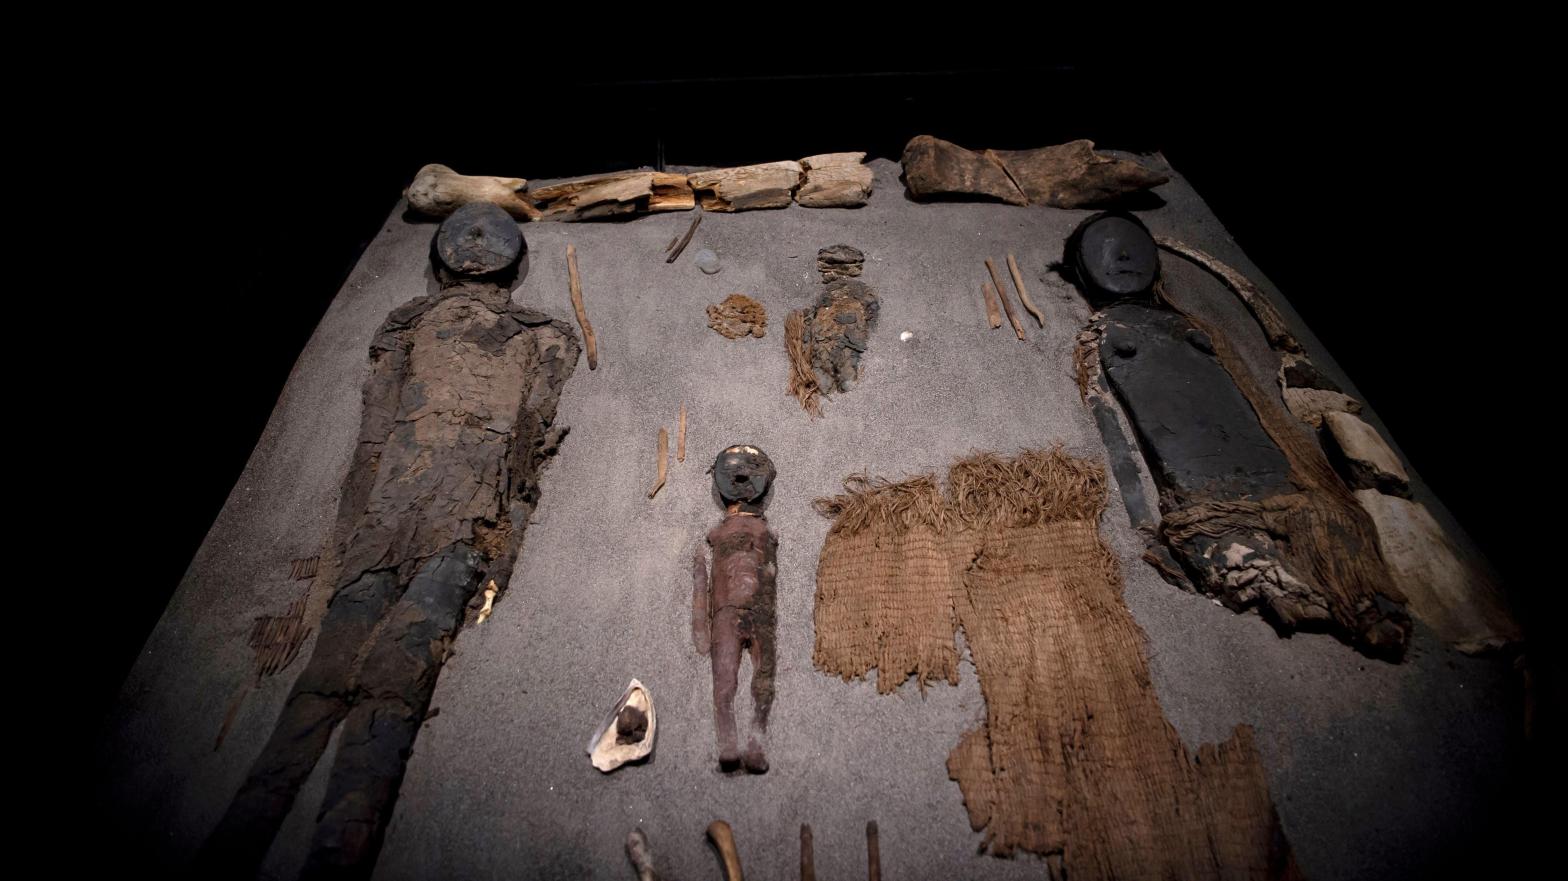 Chinchorro mummies on display at the San Miguel de Azapa archaeological museum in Camarones, Chile. (Photo: Martin BERNETTI / AFP, Getty Images)